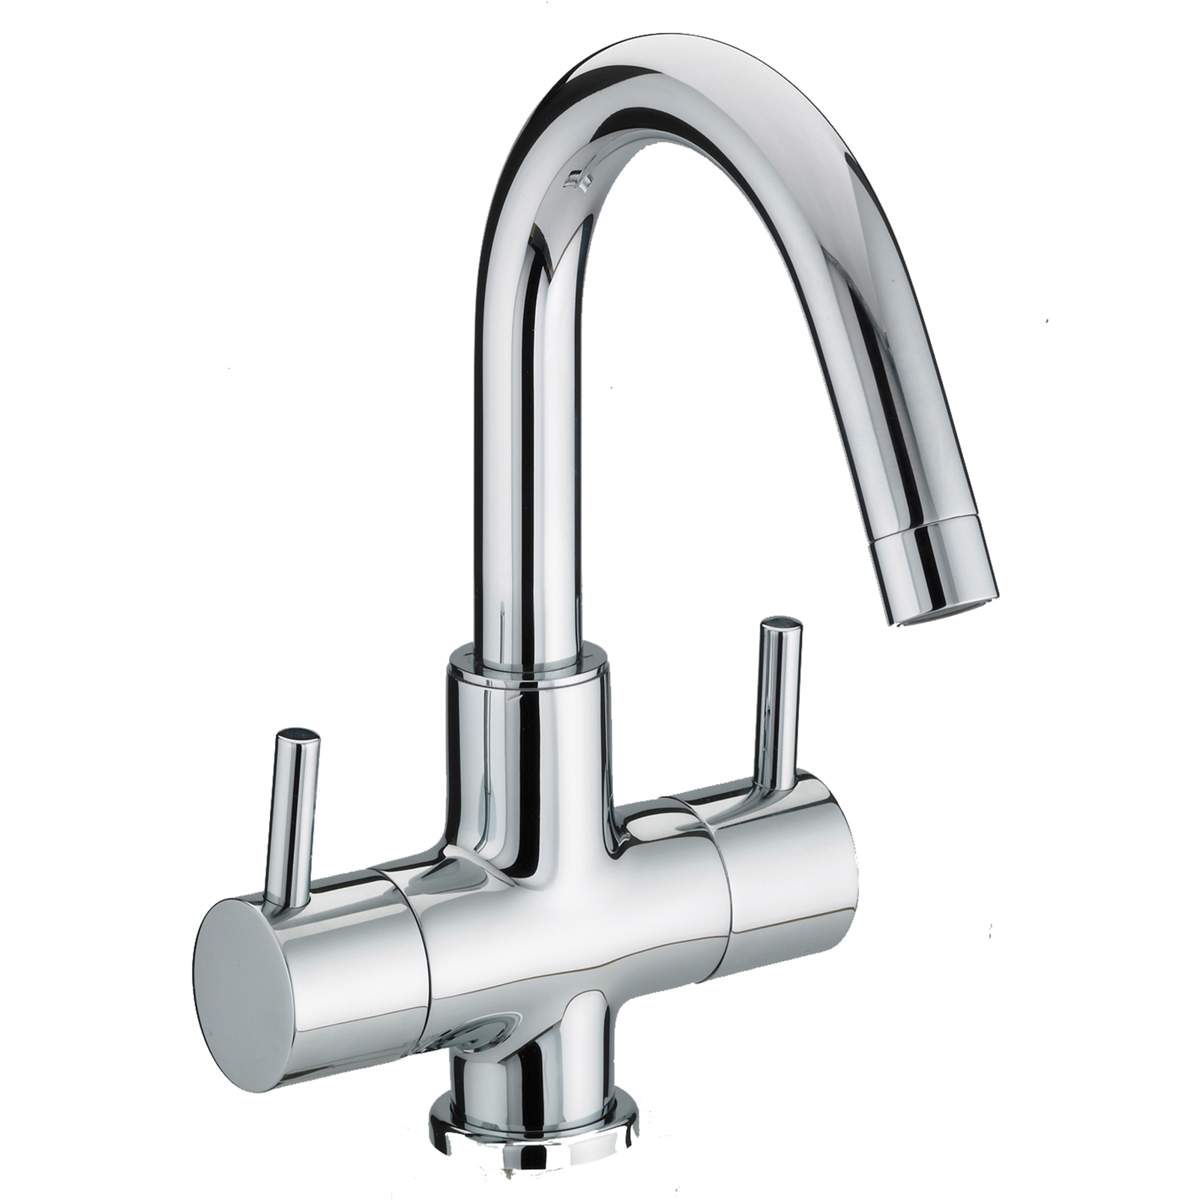 Bristan Prism Twin Handled Basin Mixer without Waste (PM BAS2 C)